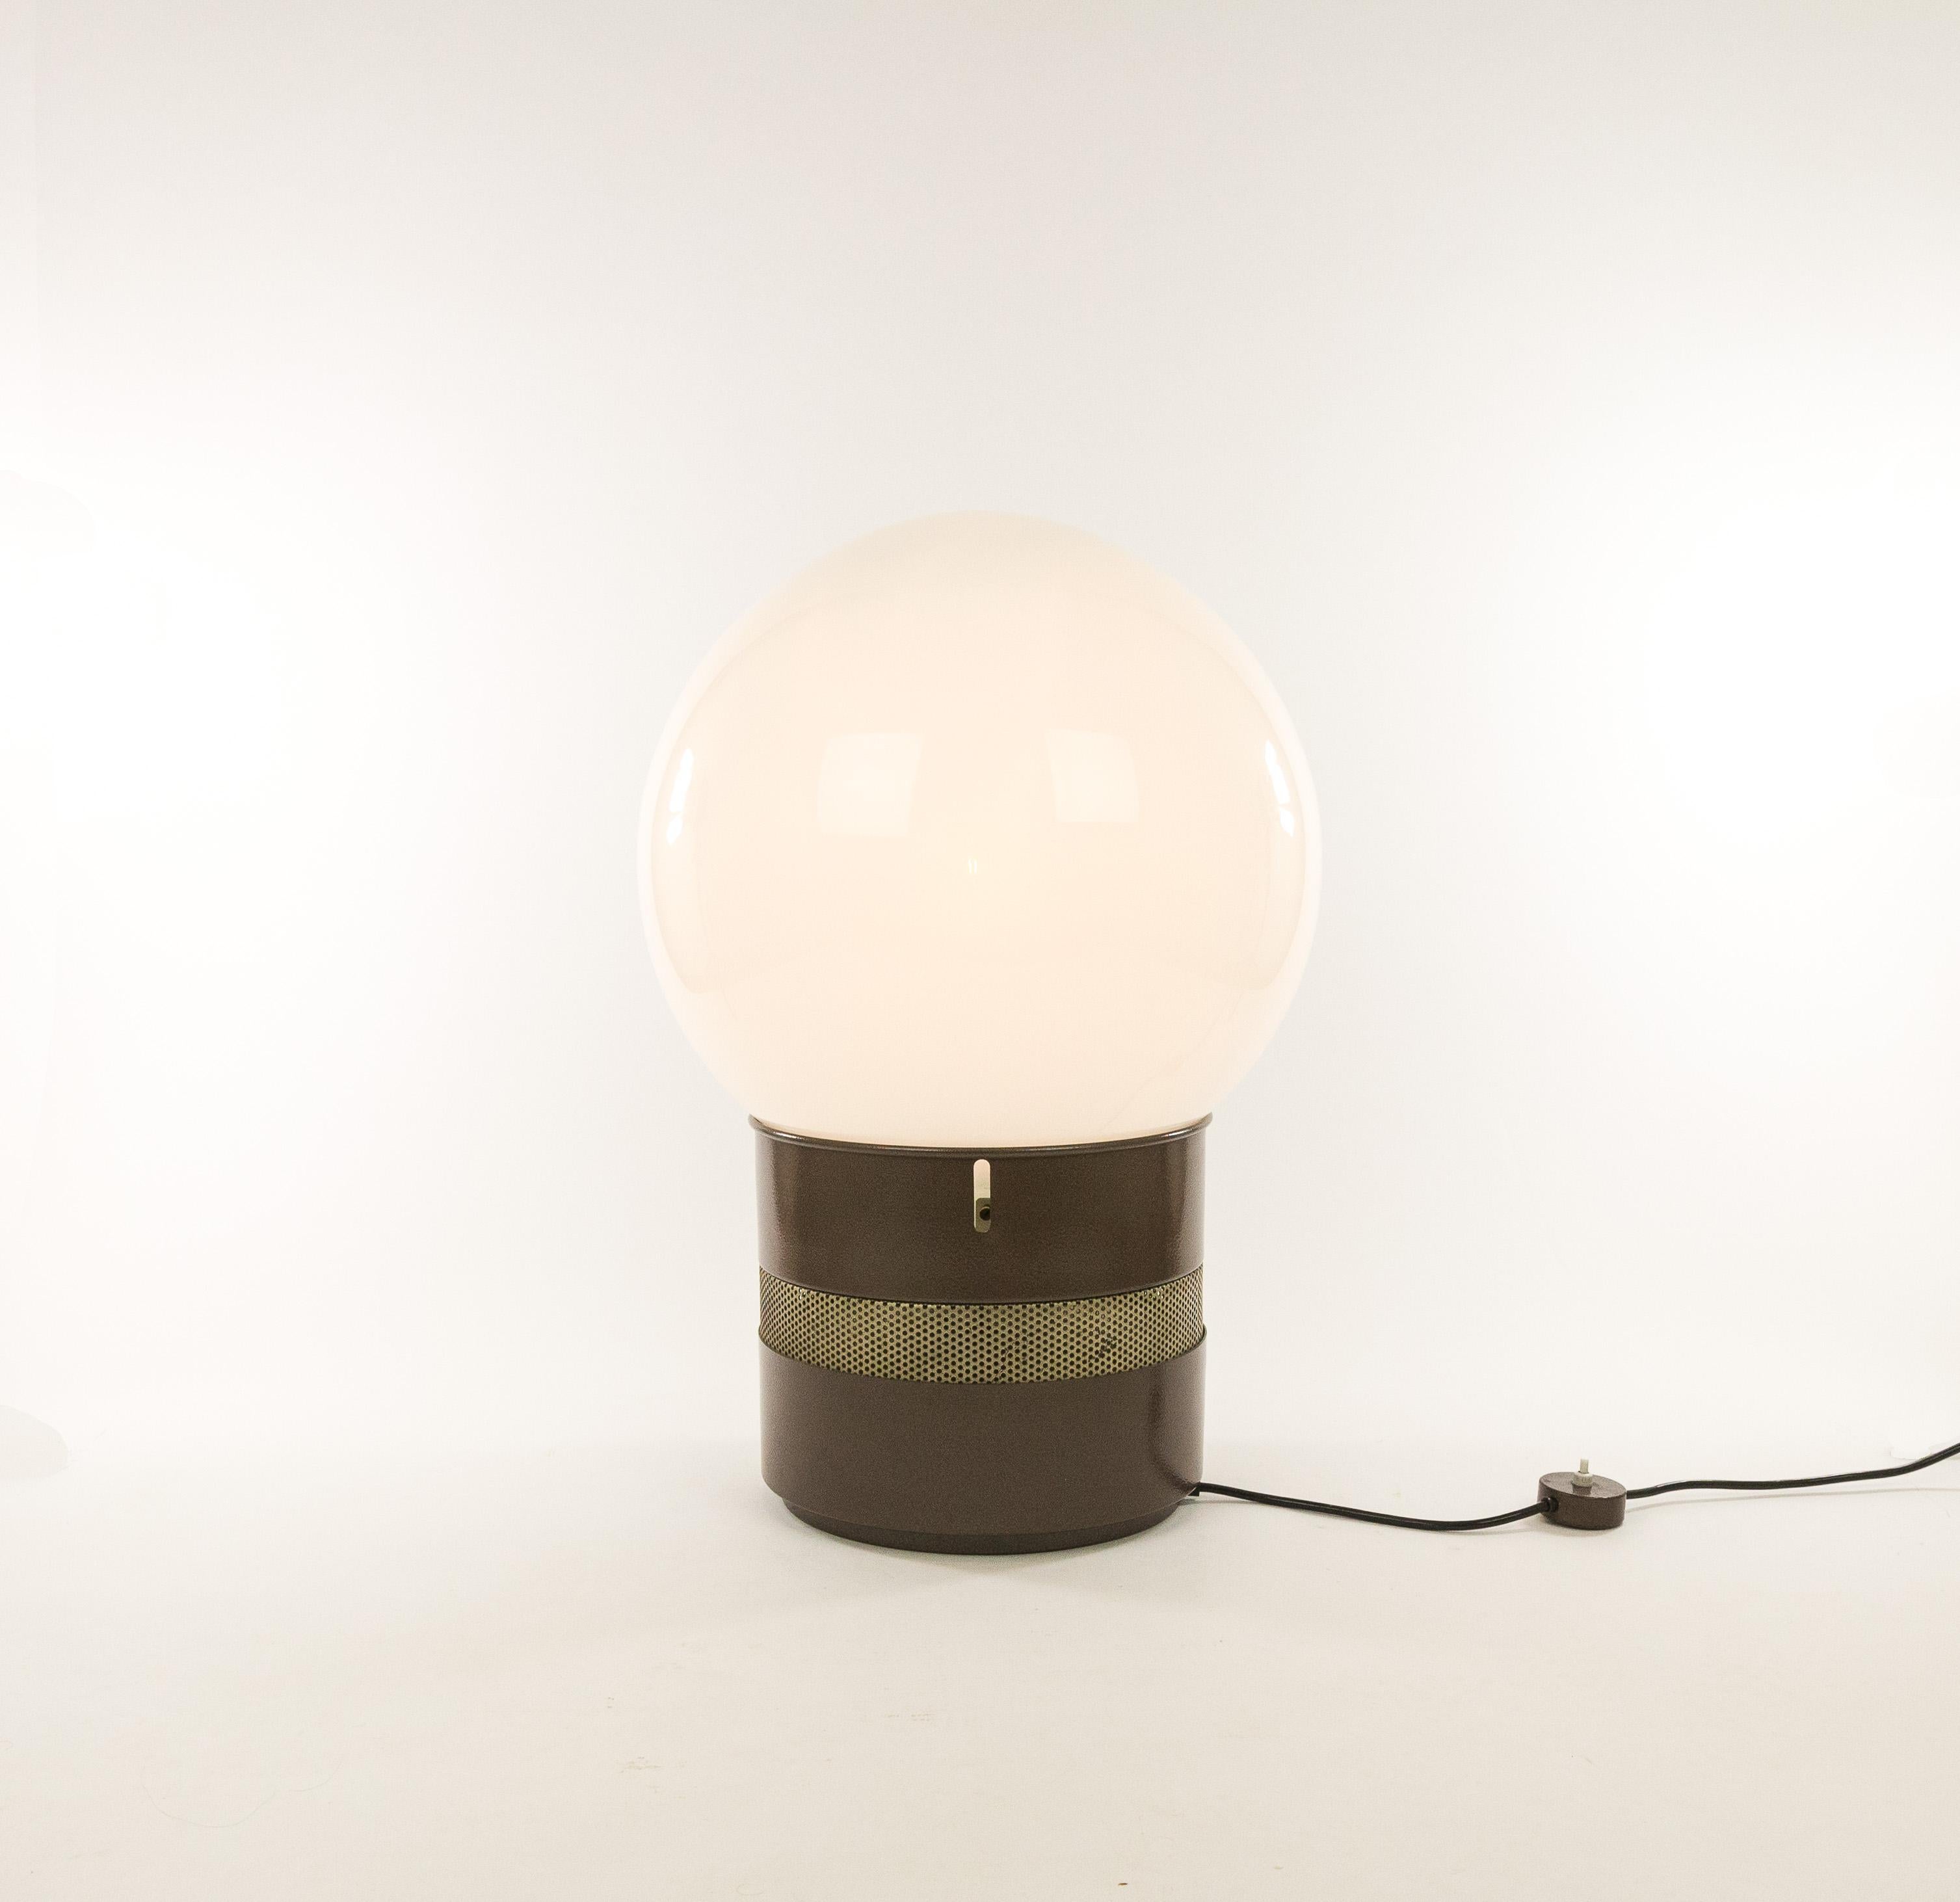 Mezzoracolo table or floor lamp by Italian architect Gae Aulenti, executed by Artemide. This is the smaller version, but it is still 67 cm high. The other version is named Oracolo, and the height of this lamp is 140 cm.

A large white globe in